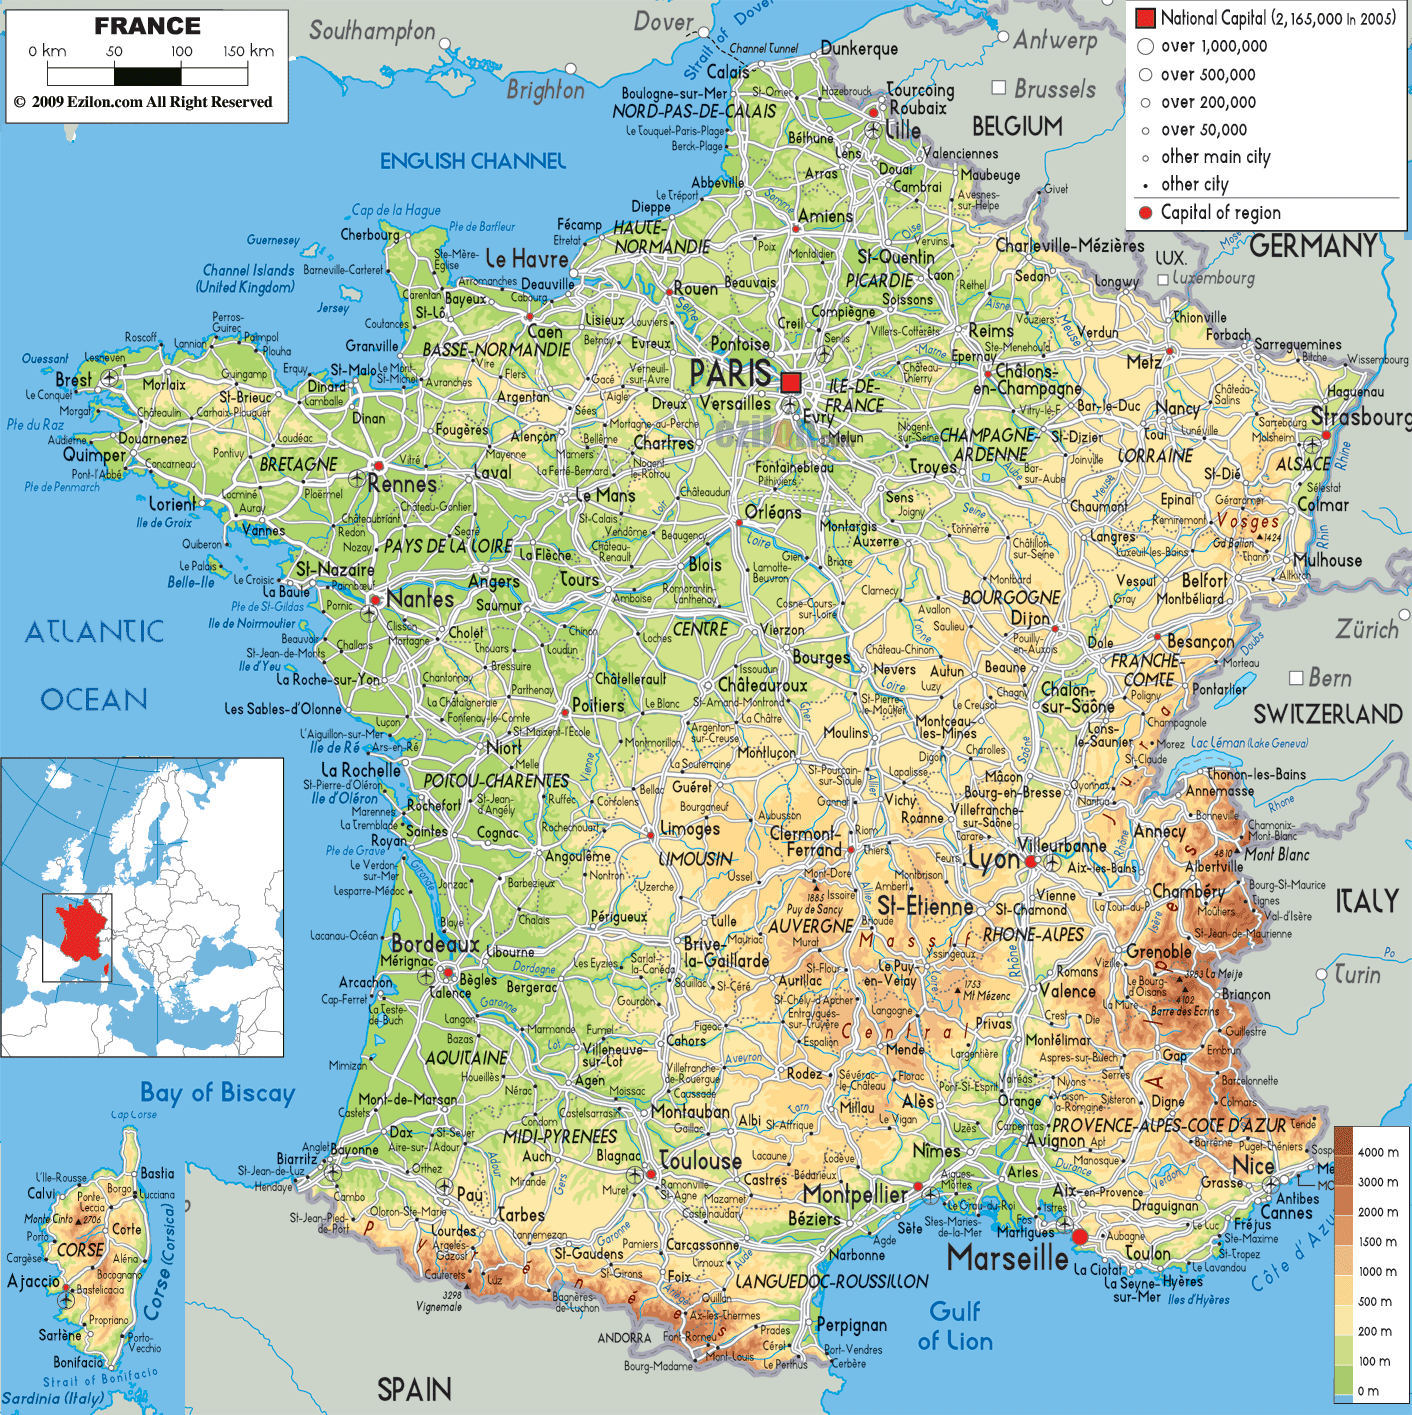 FRANCE MAP - Map Of World